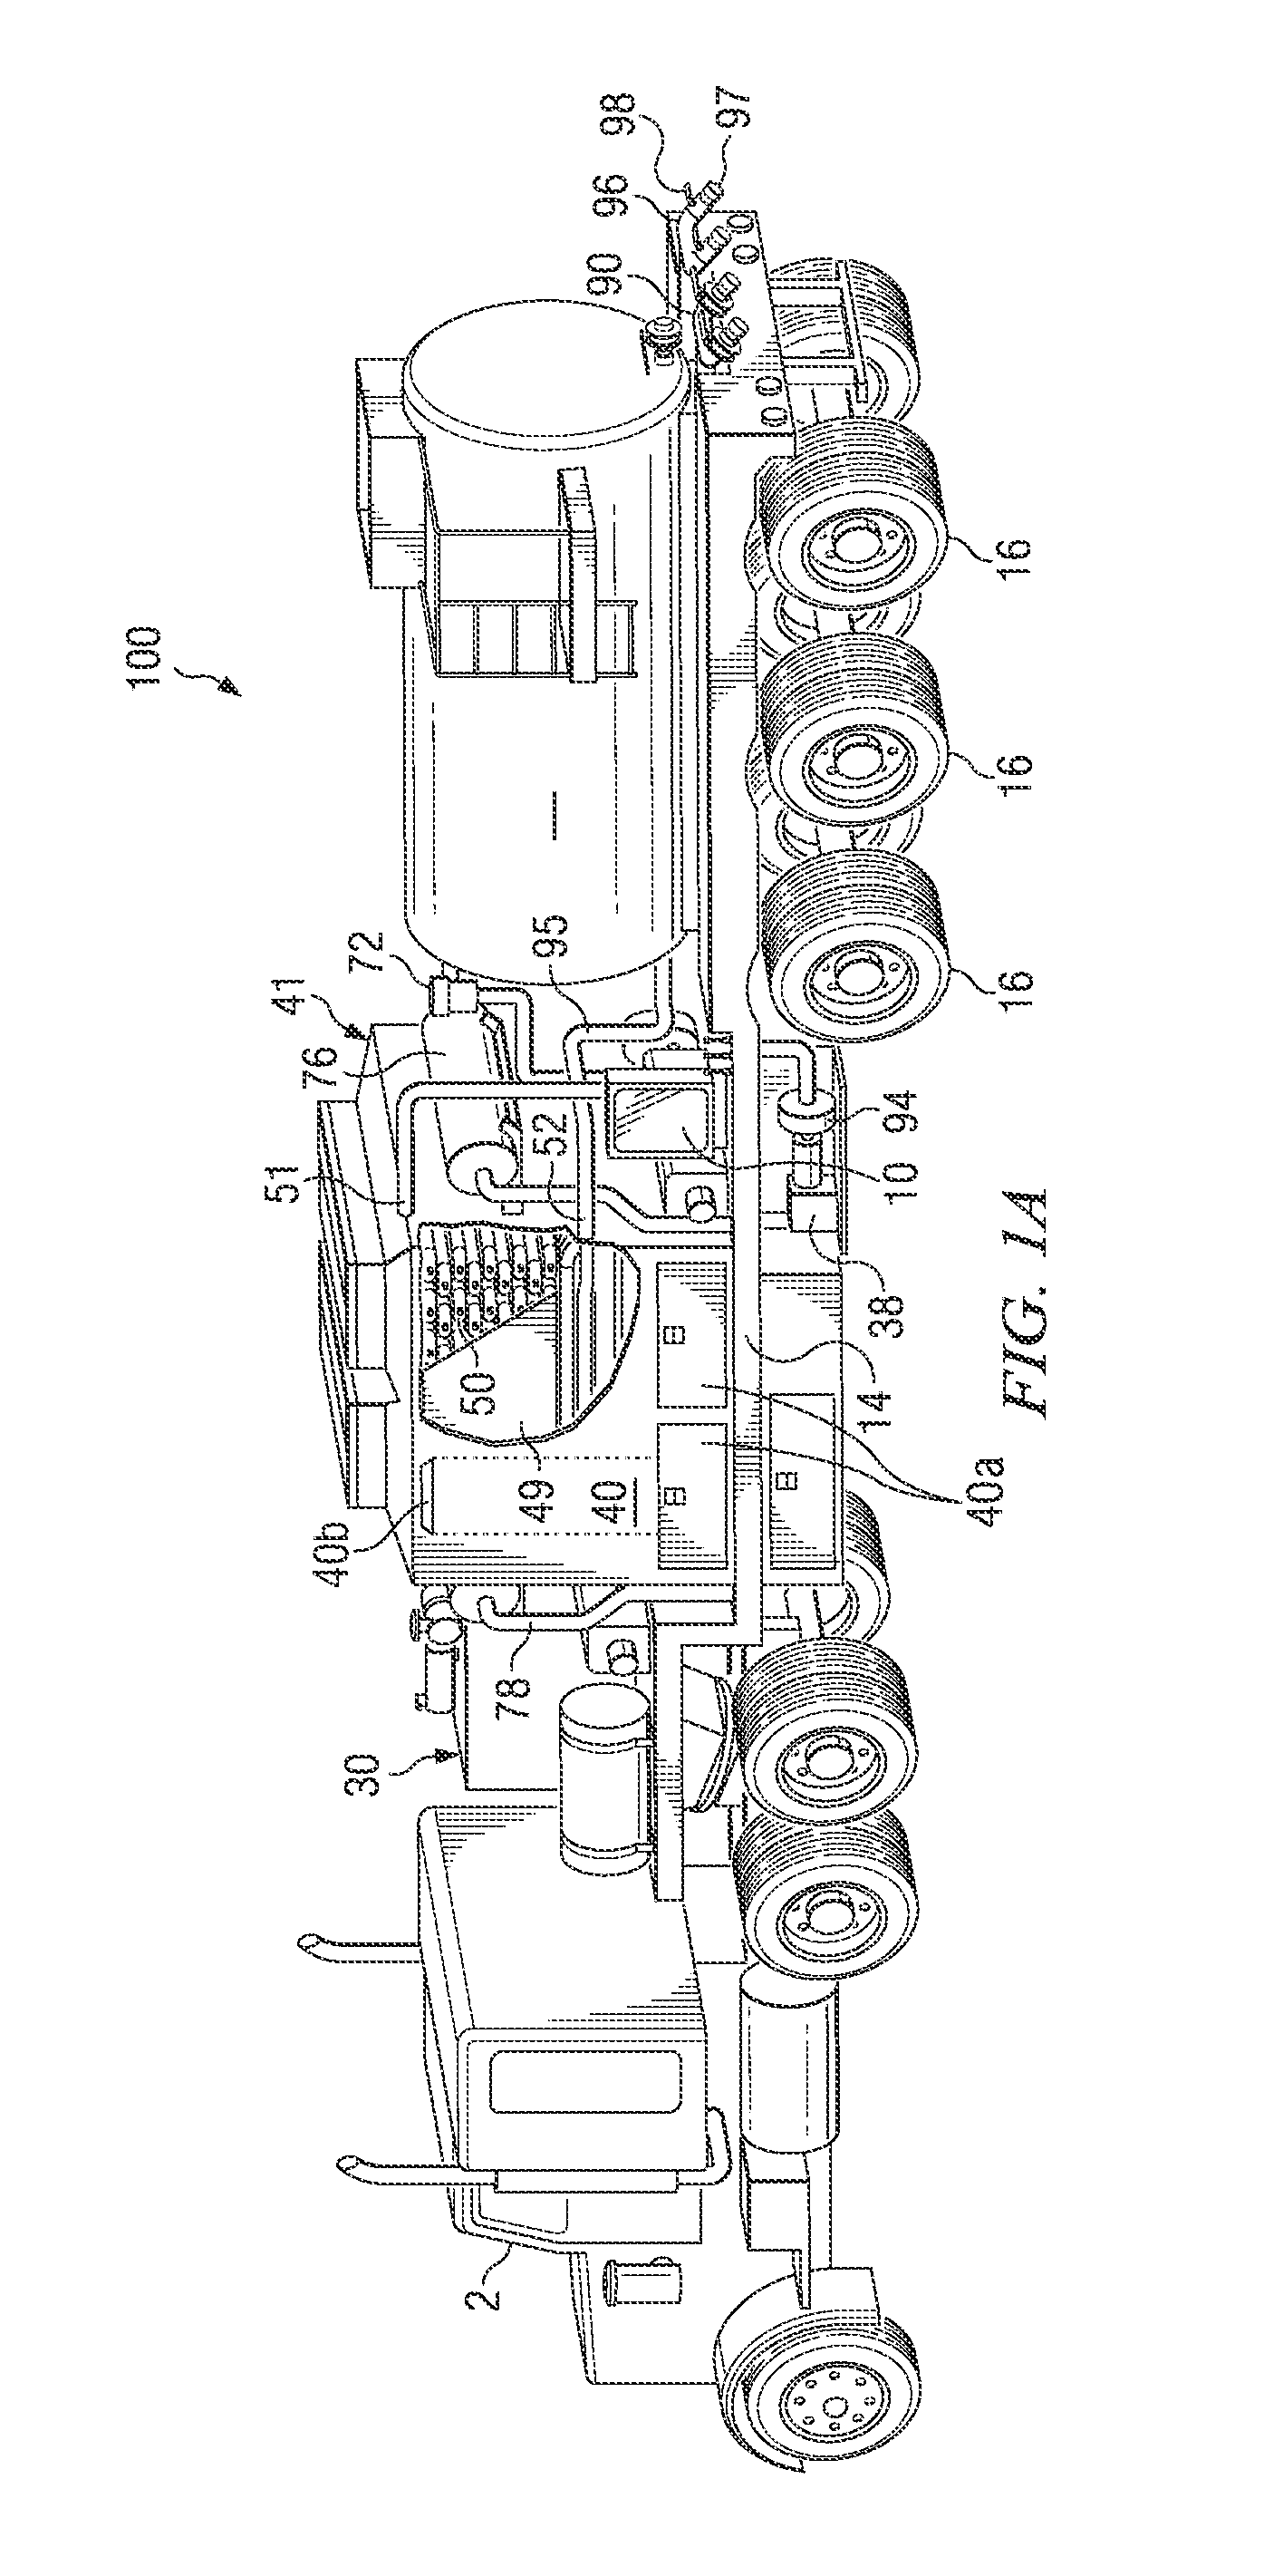 Frac water heating system and method for hydraulically fracturing a well